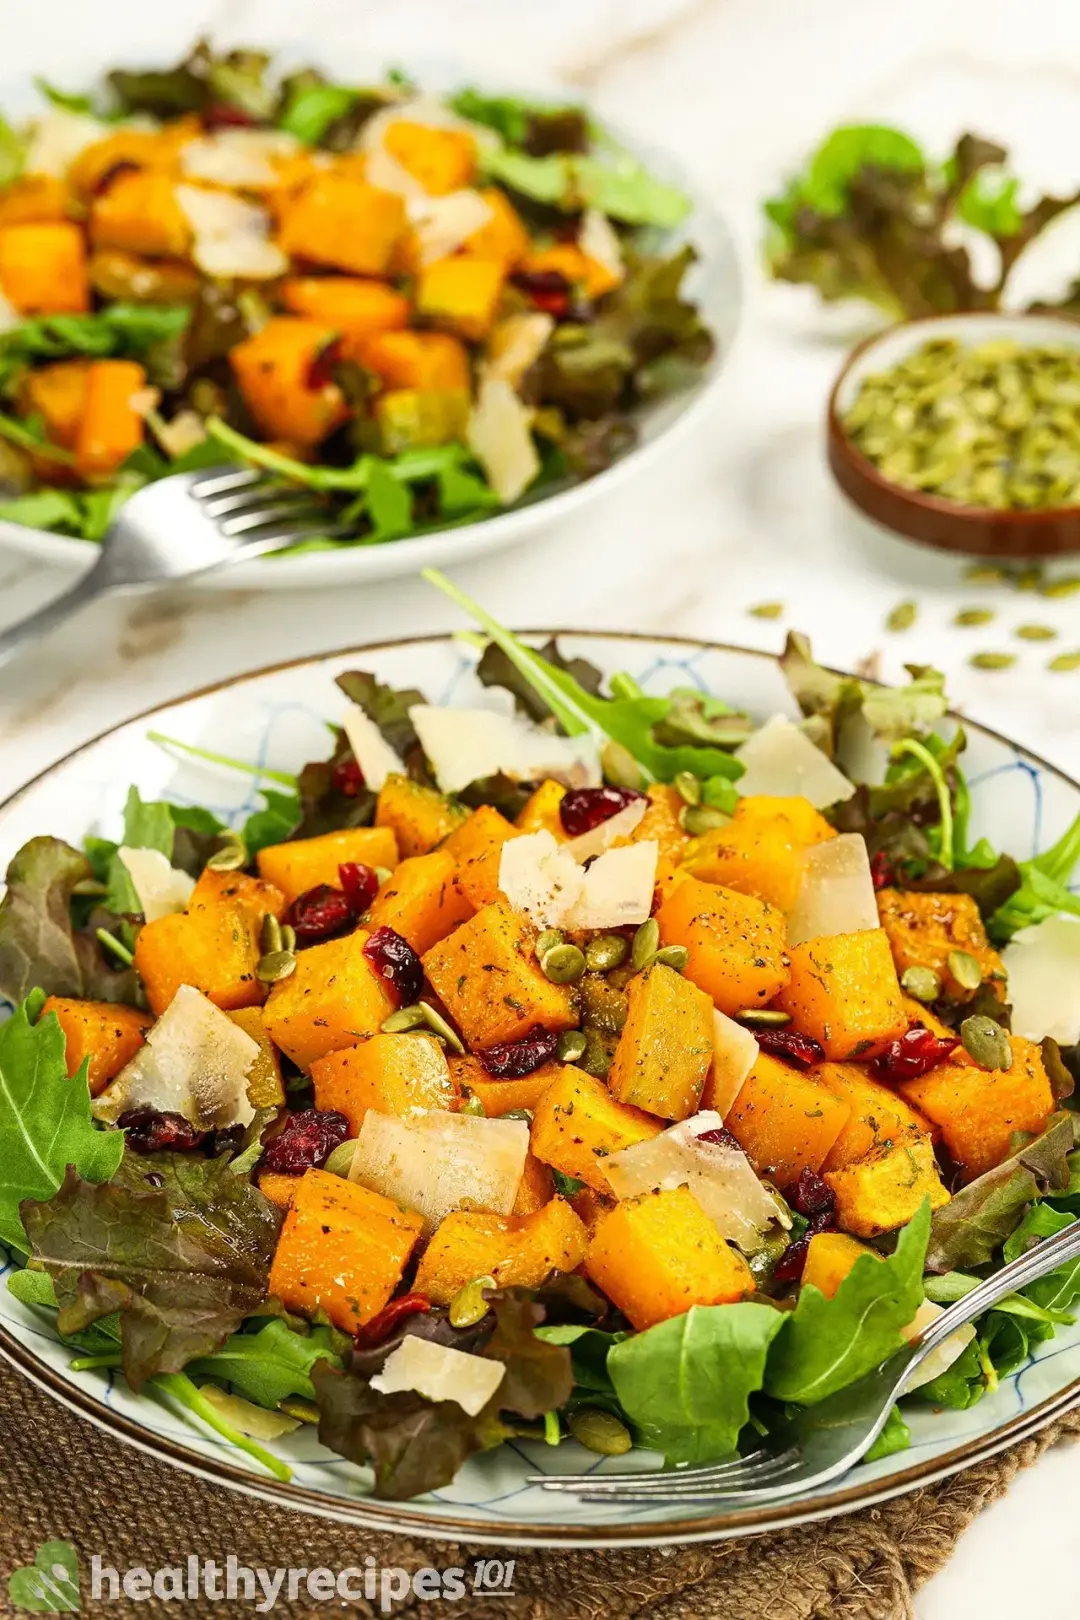 How to Store Leftovers Butternut Squash Salad